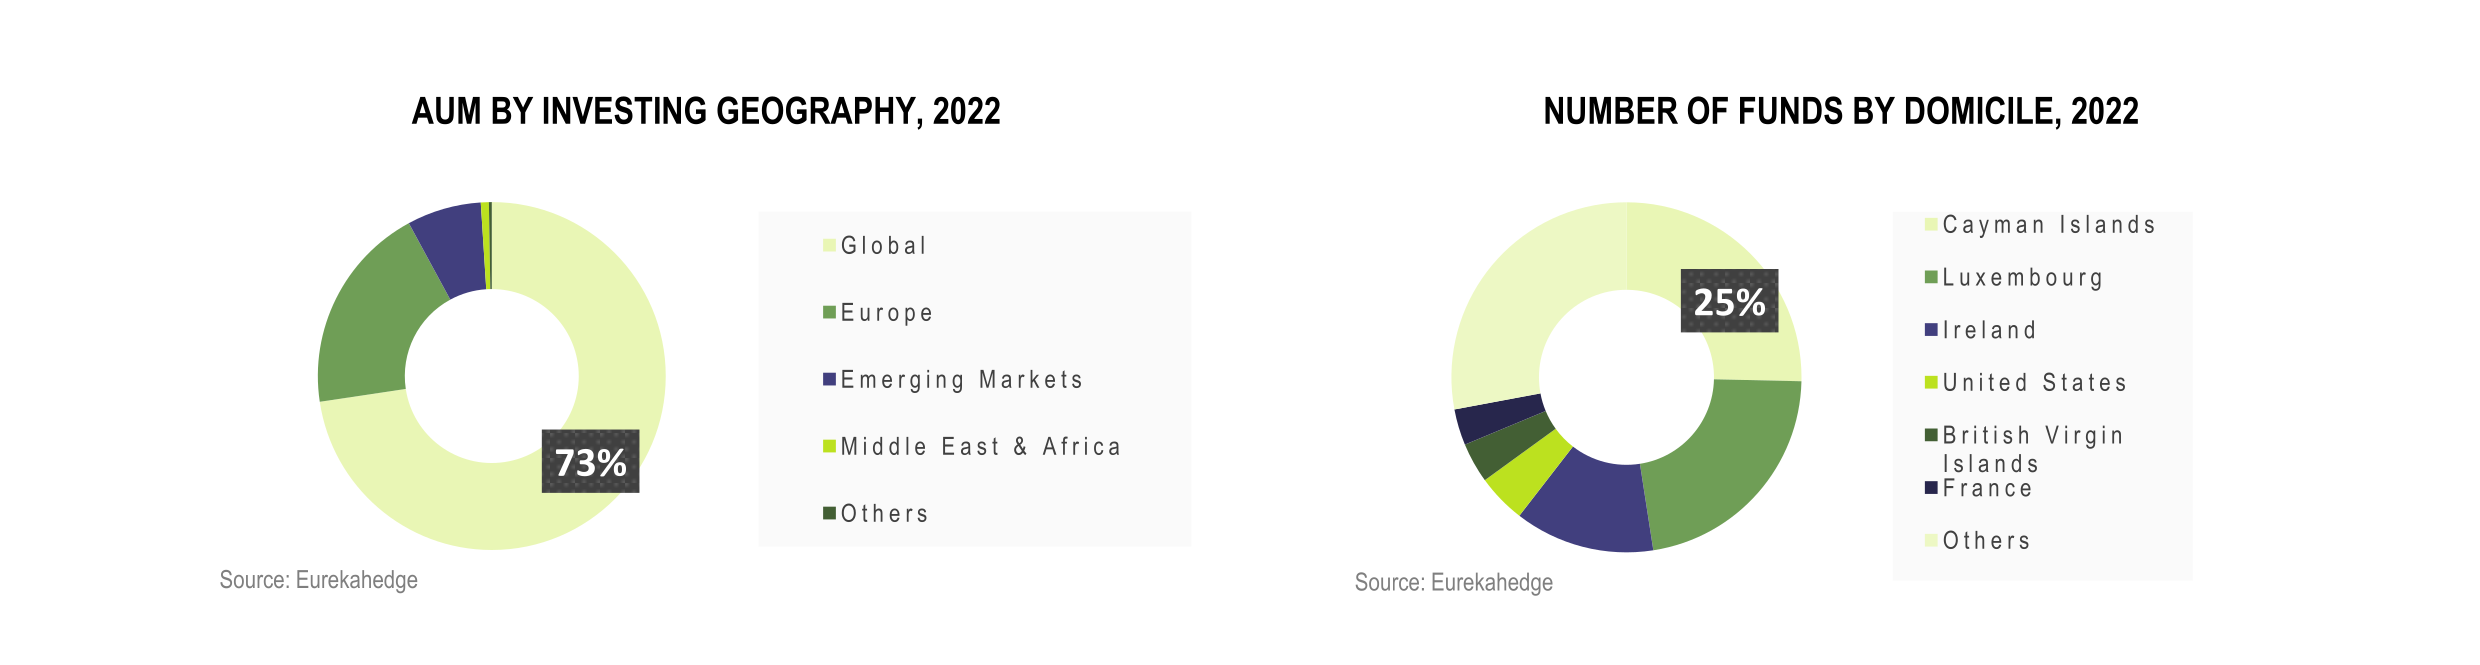 Global Hedge Funds Infographic May 2022 - AUM by investing Geography